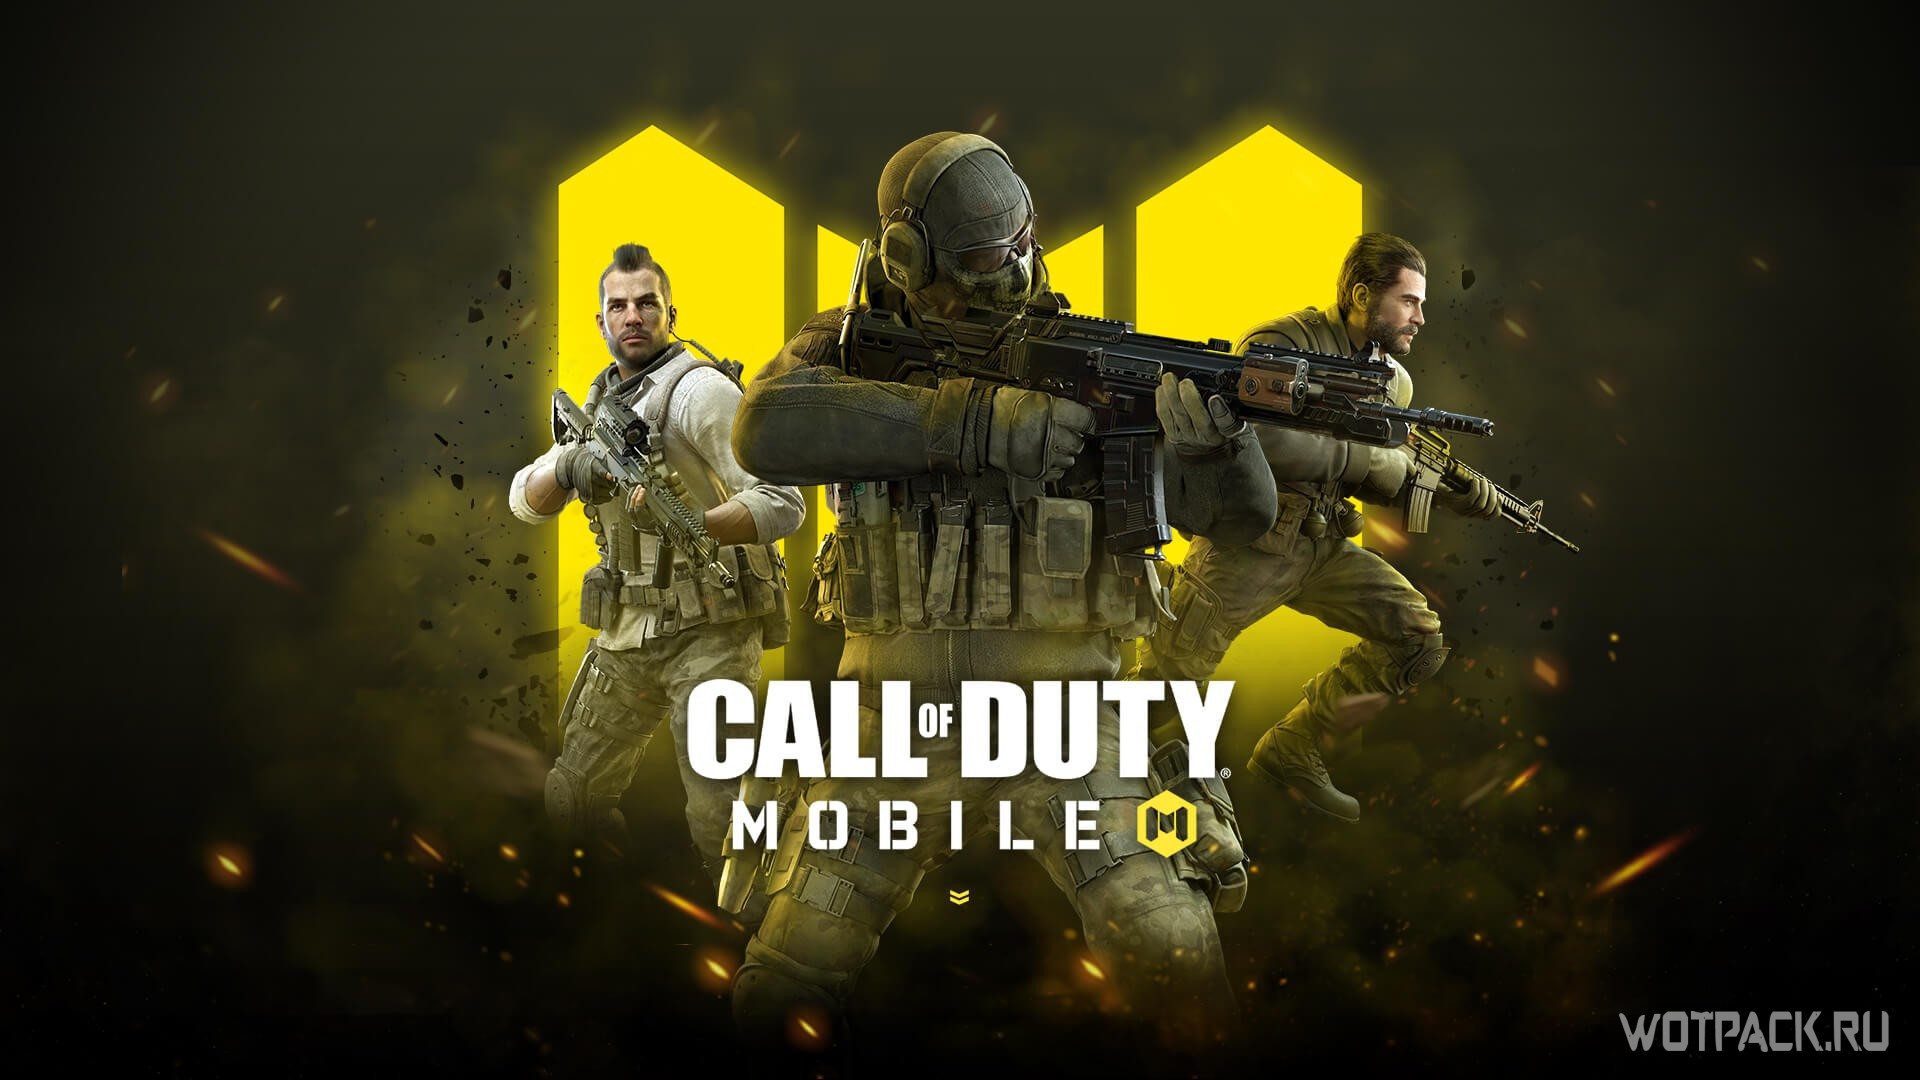 Is this a scam? : r/CallOfDutyMobile